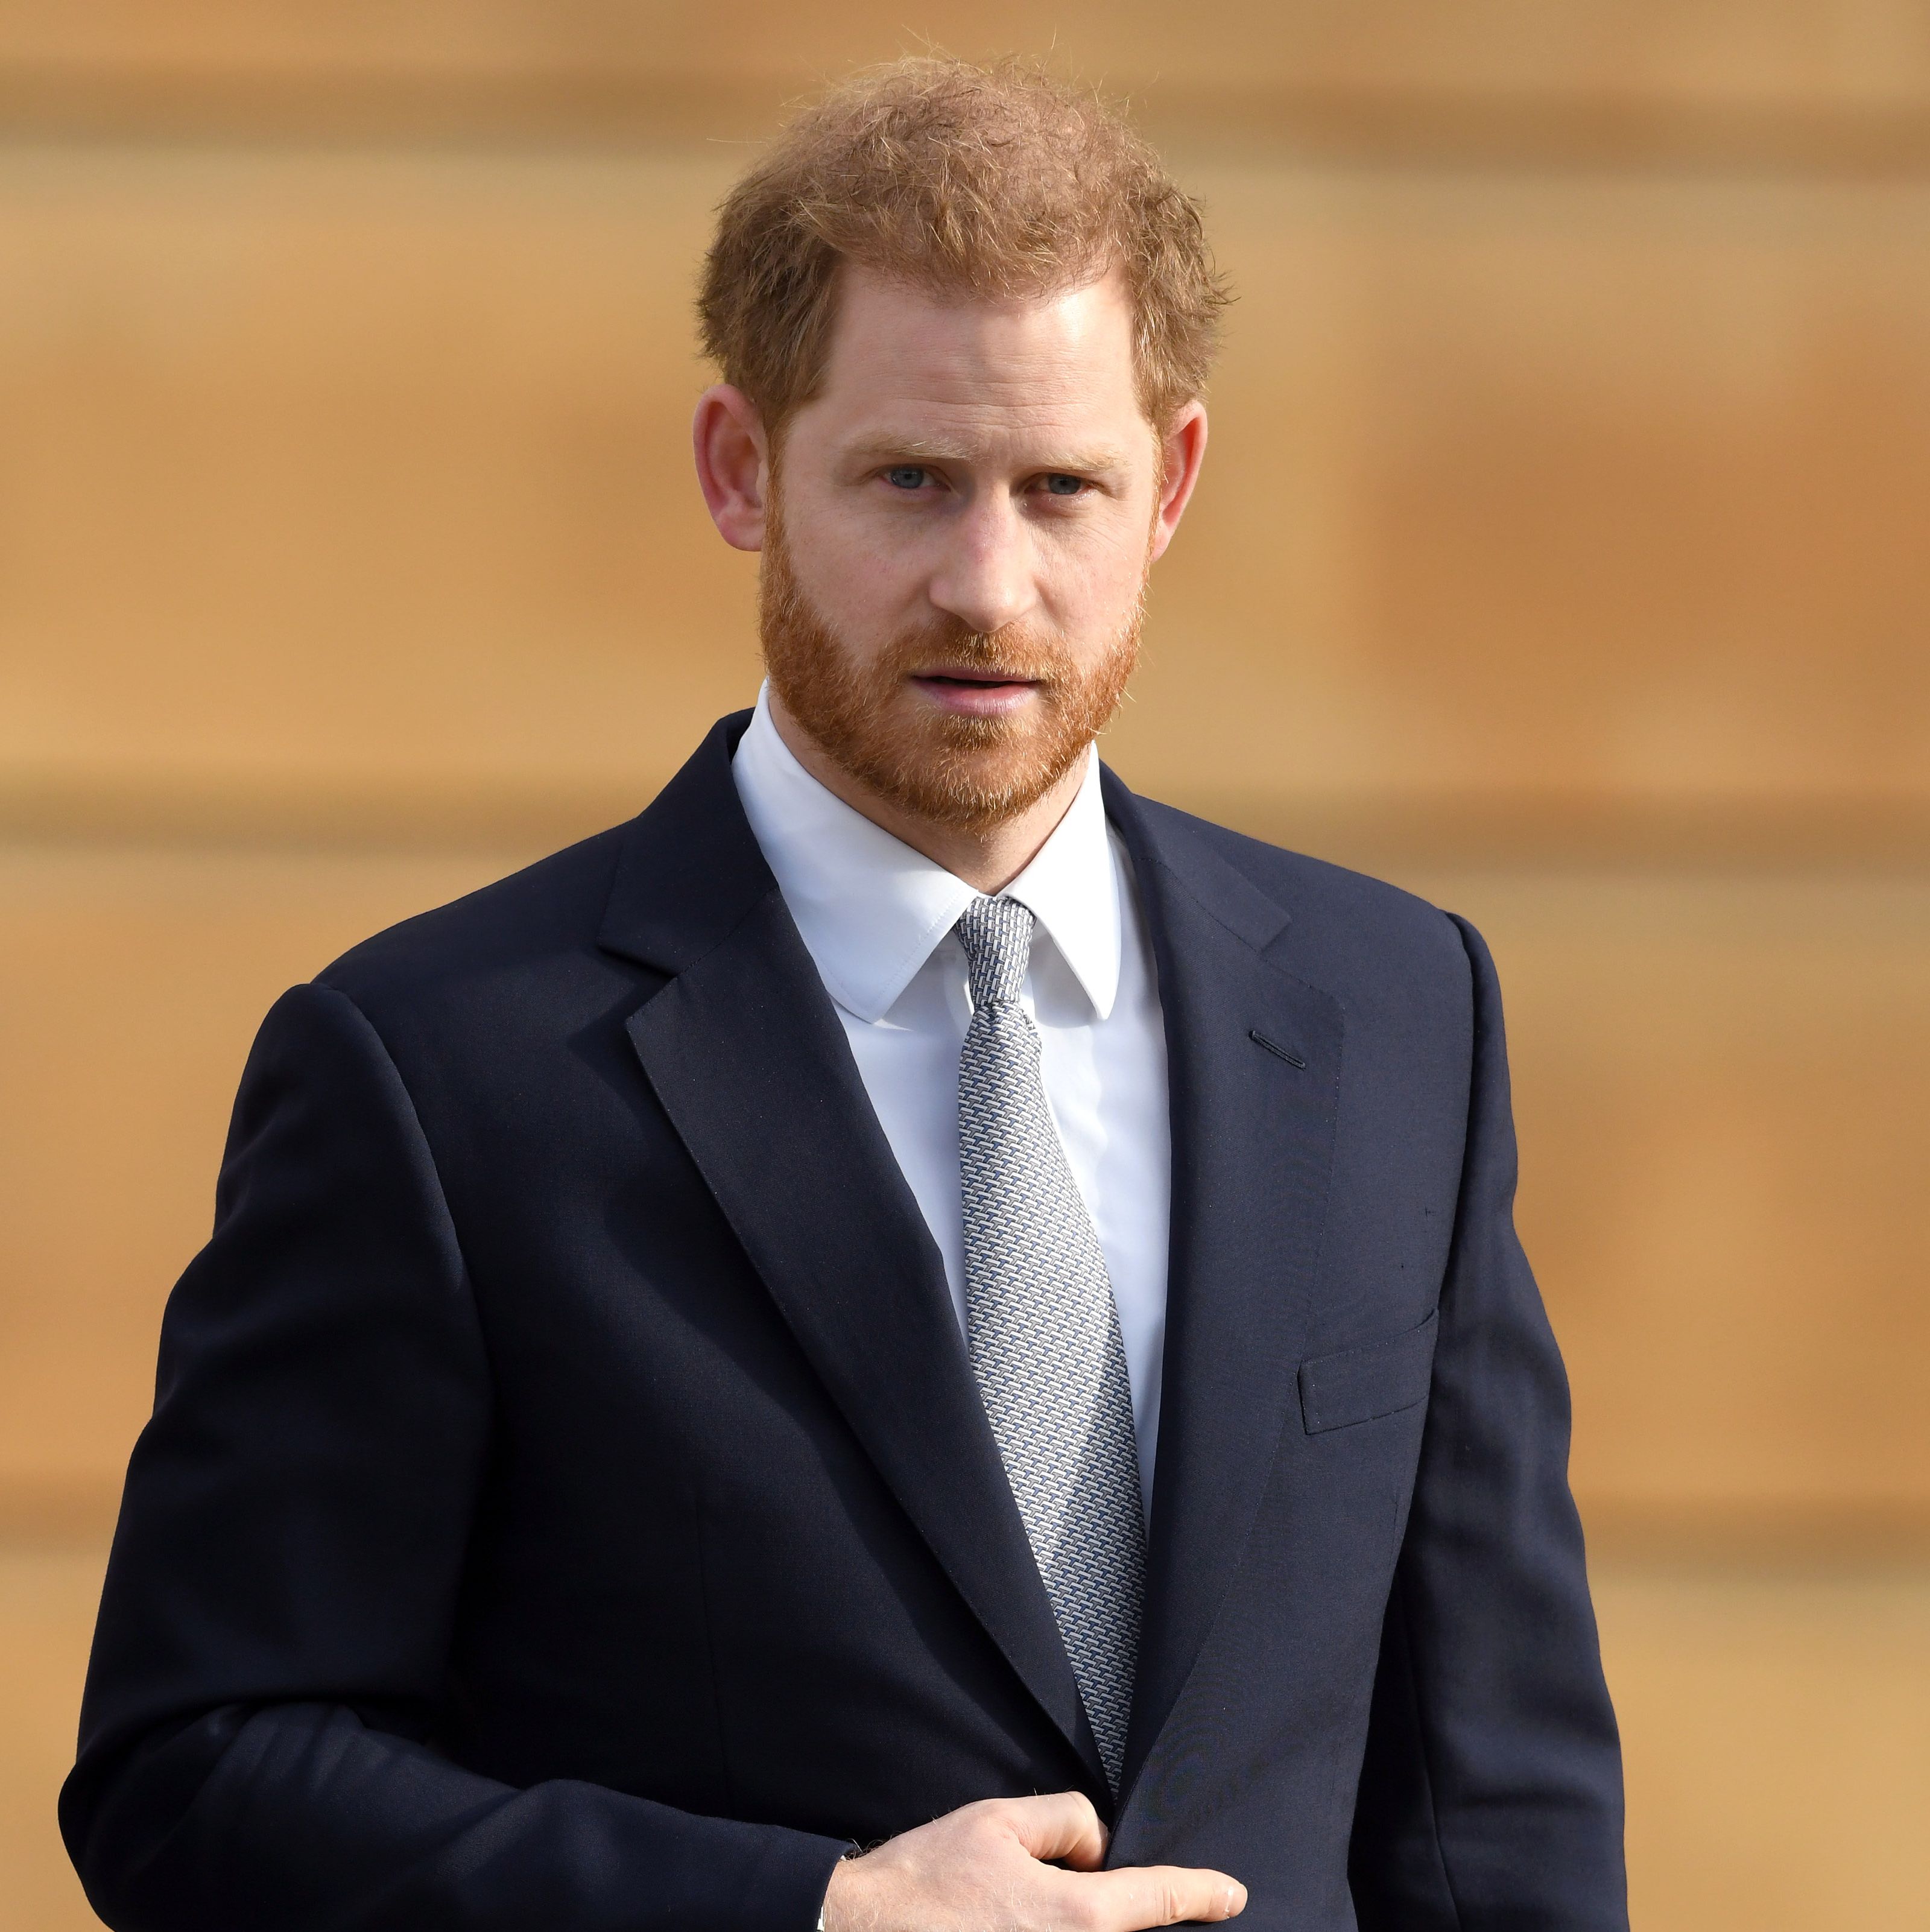 Prince Harry Shared Photos of the Kitchen Where Prince William Physically Attacked Him